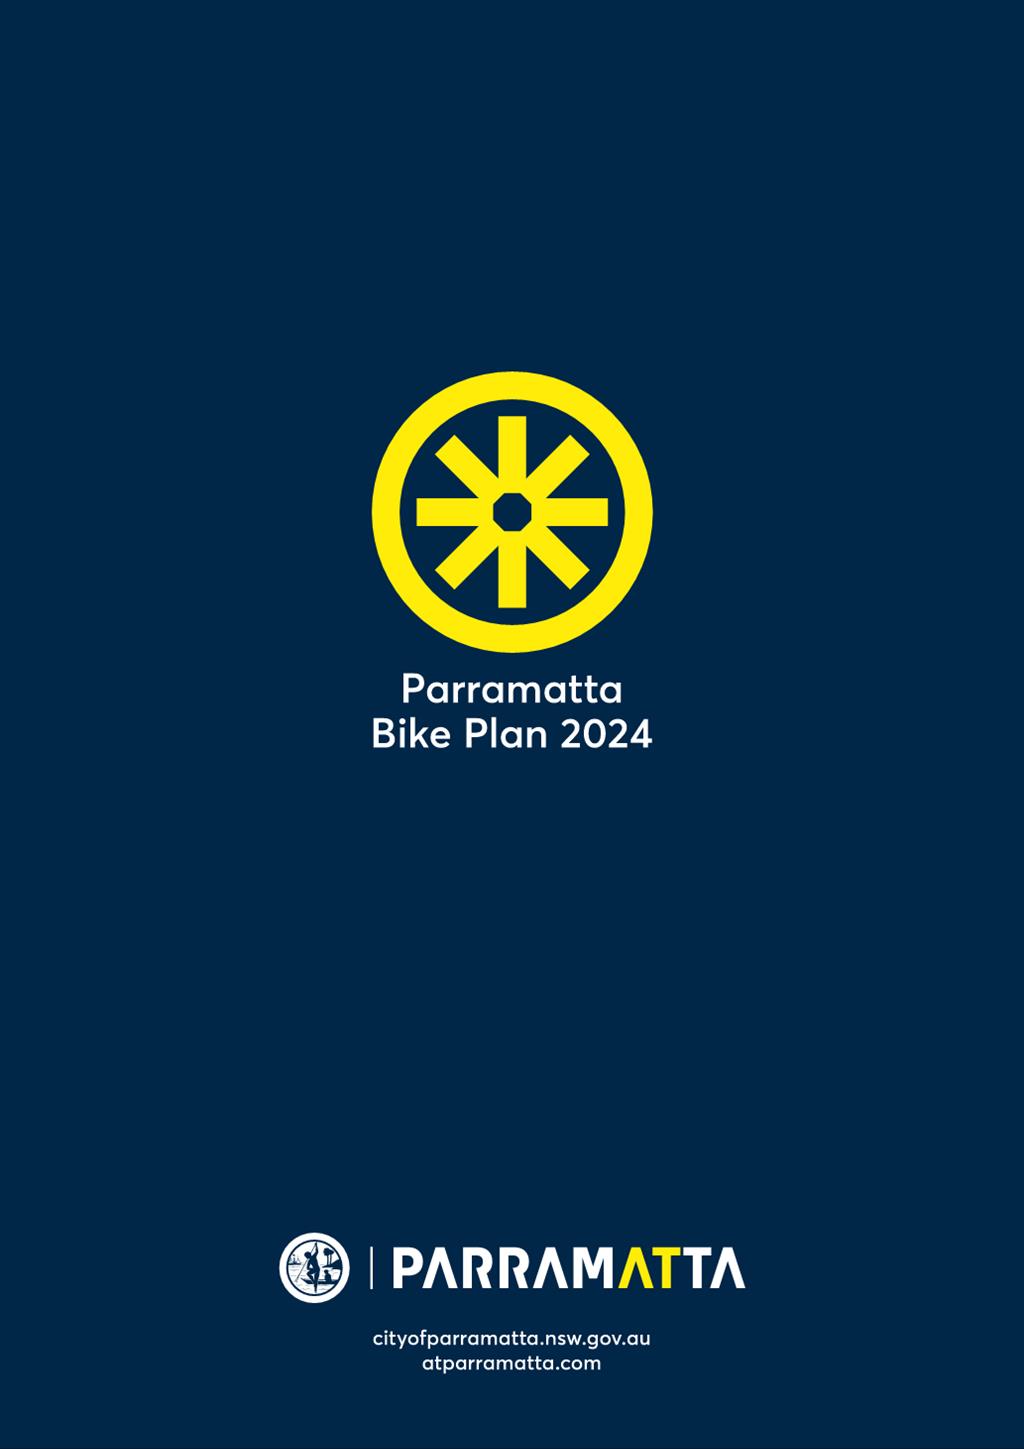 A blue background with a yellow circle and white text

Description automatically generated